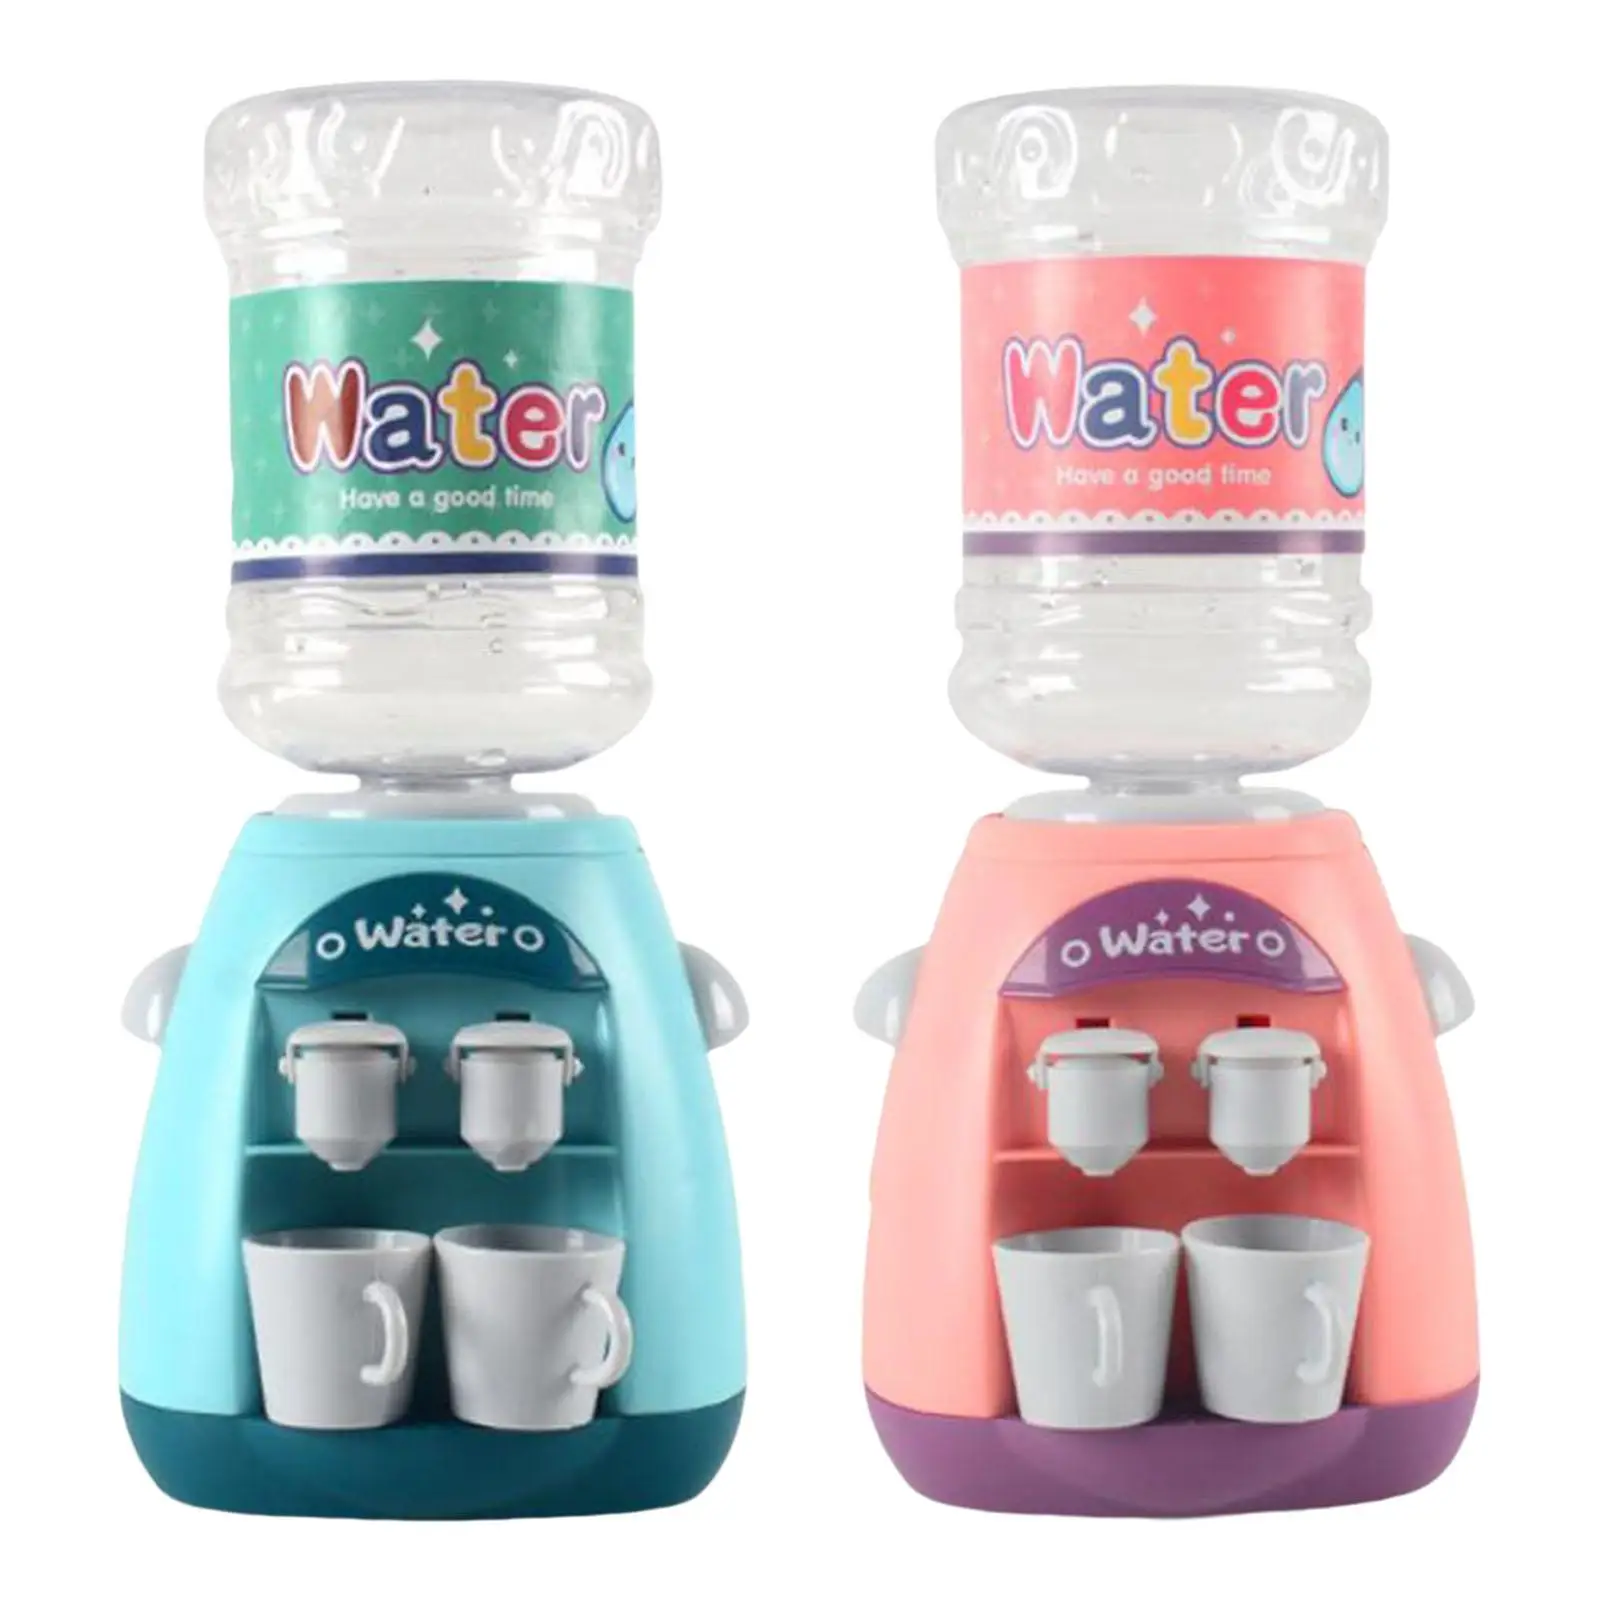 Fun Water Dispenser Toy with 2 Cups for Party Favors Play House Parts Age 3+ Novelty Gifts